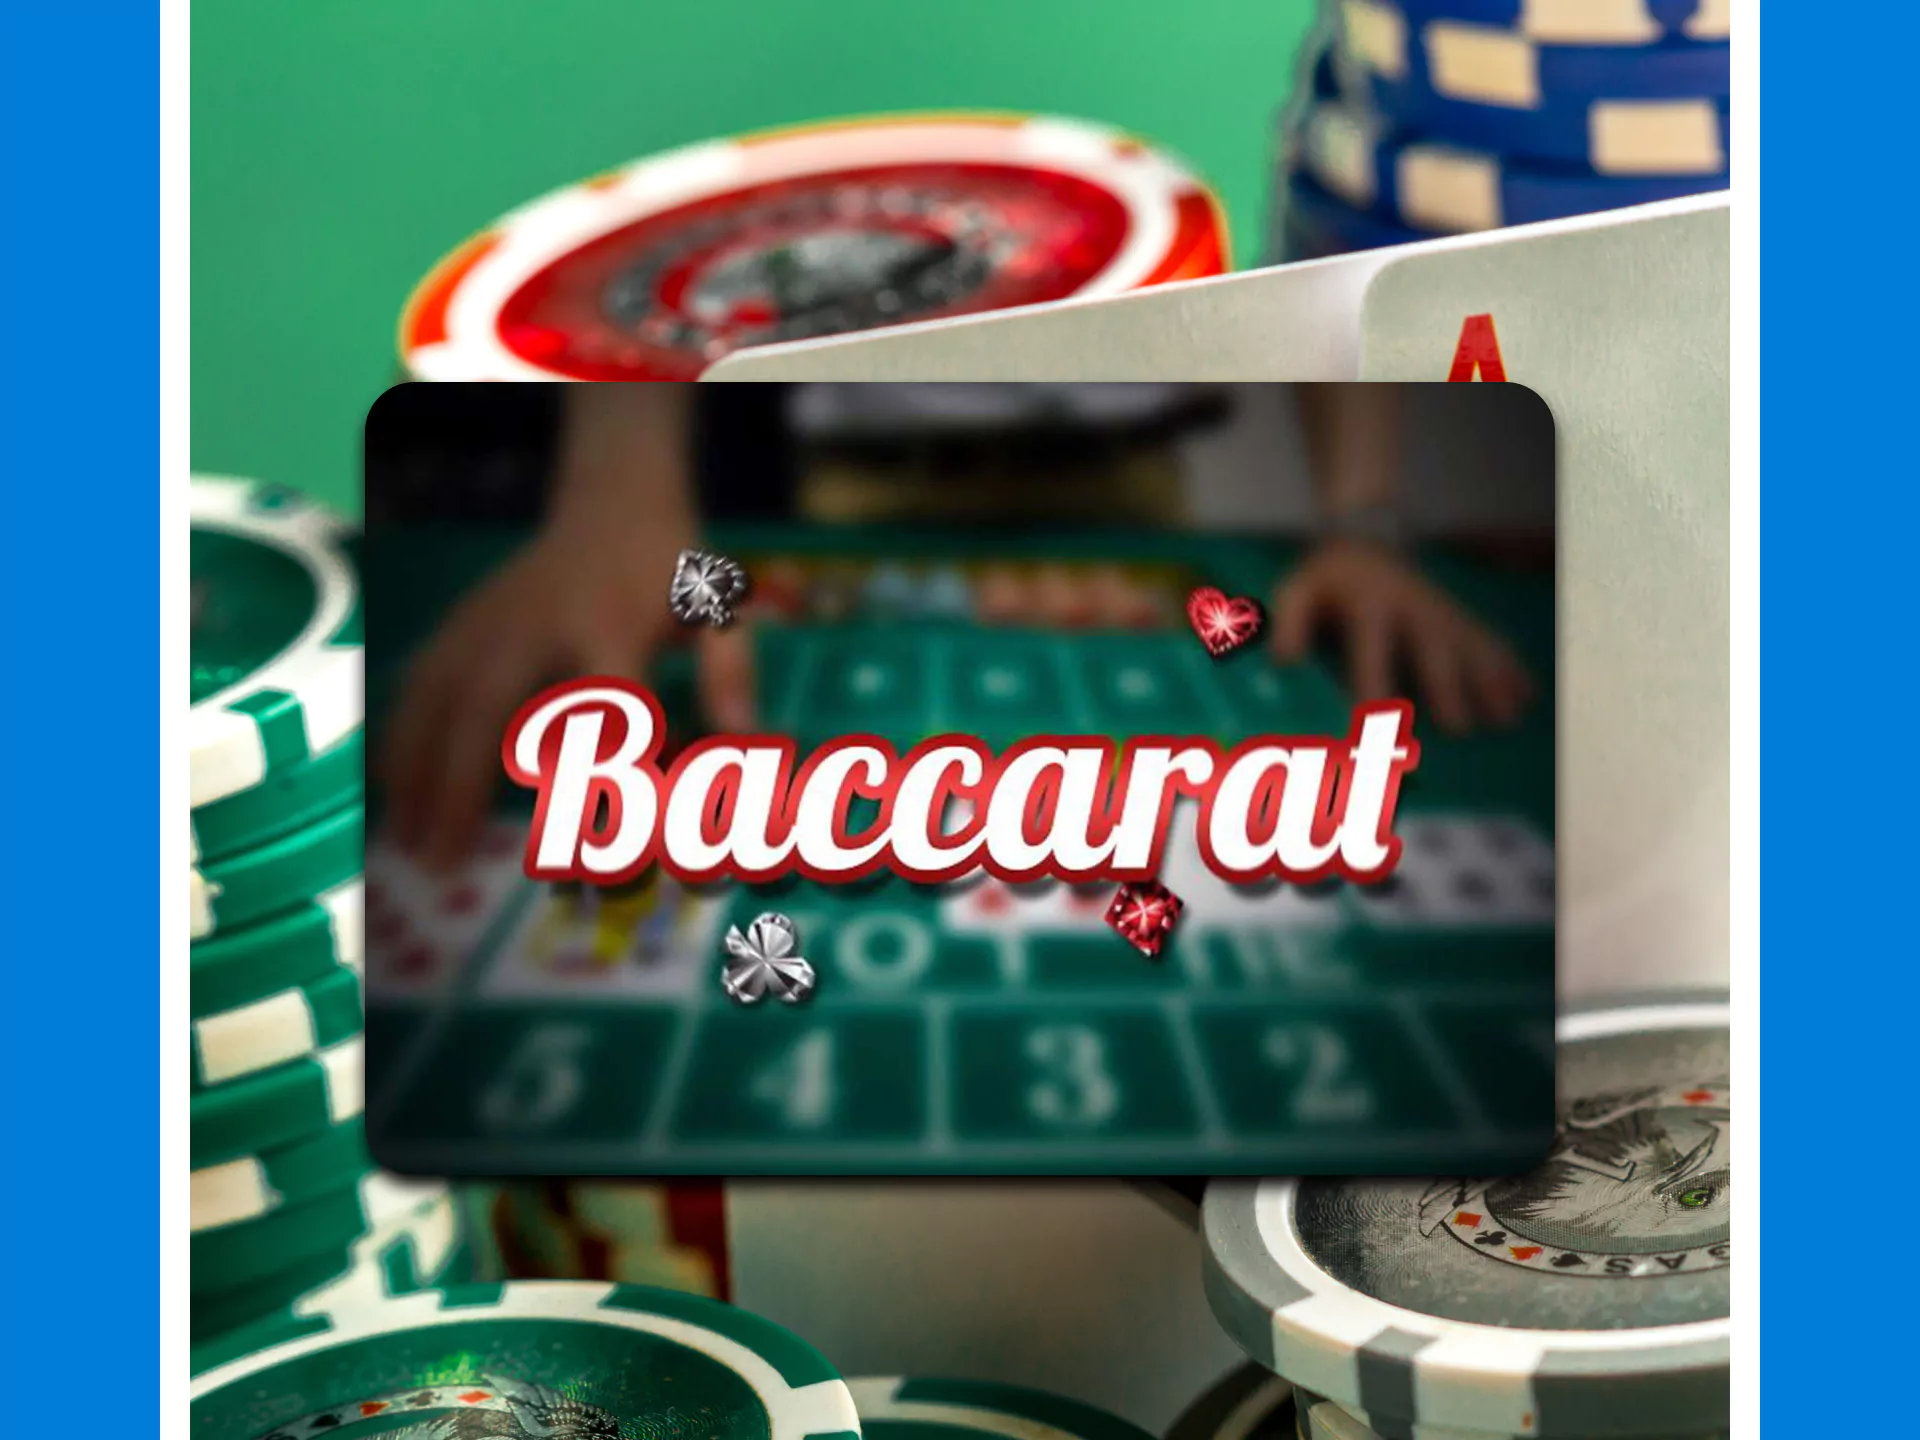 Go to the desired section of Crickex to play baccarat.